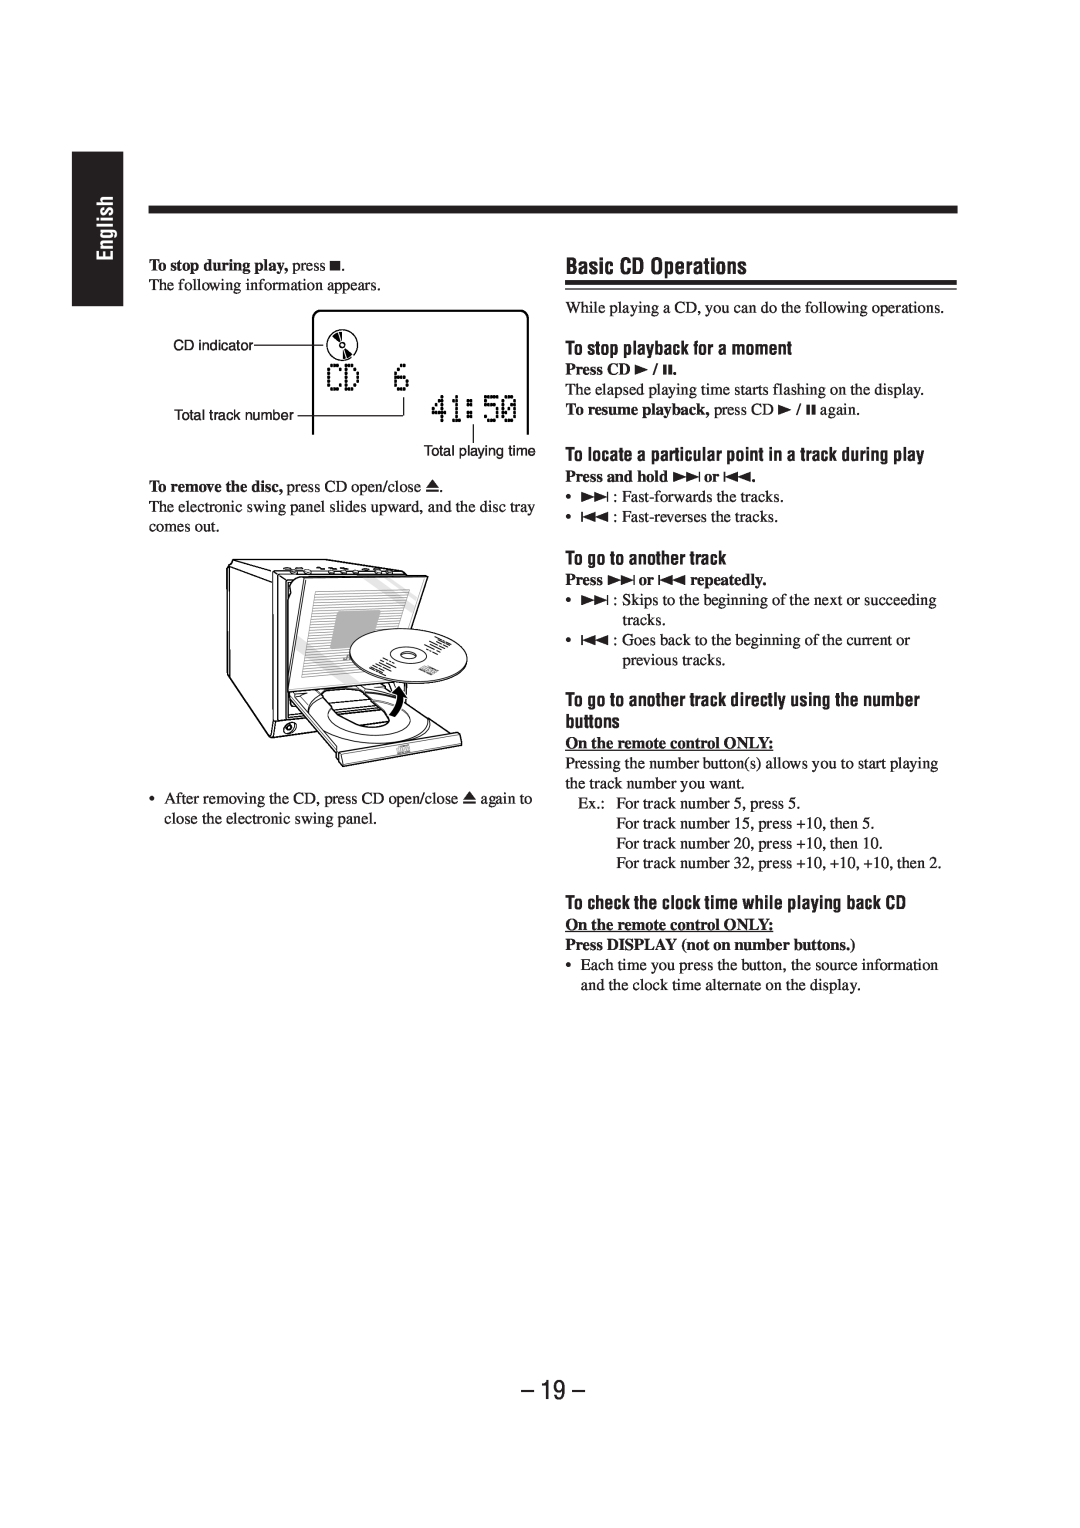 JVC UX-A52 manual English, Basic CD Operations, To stop playback for a moment, To go to another track 